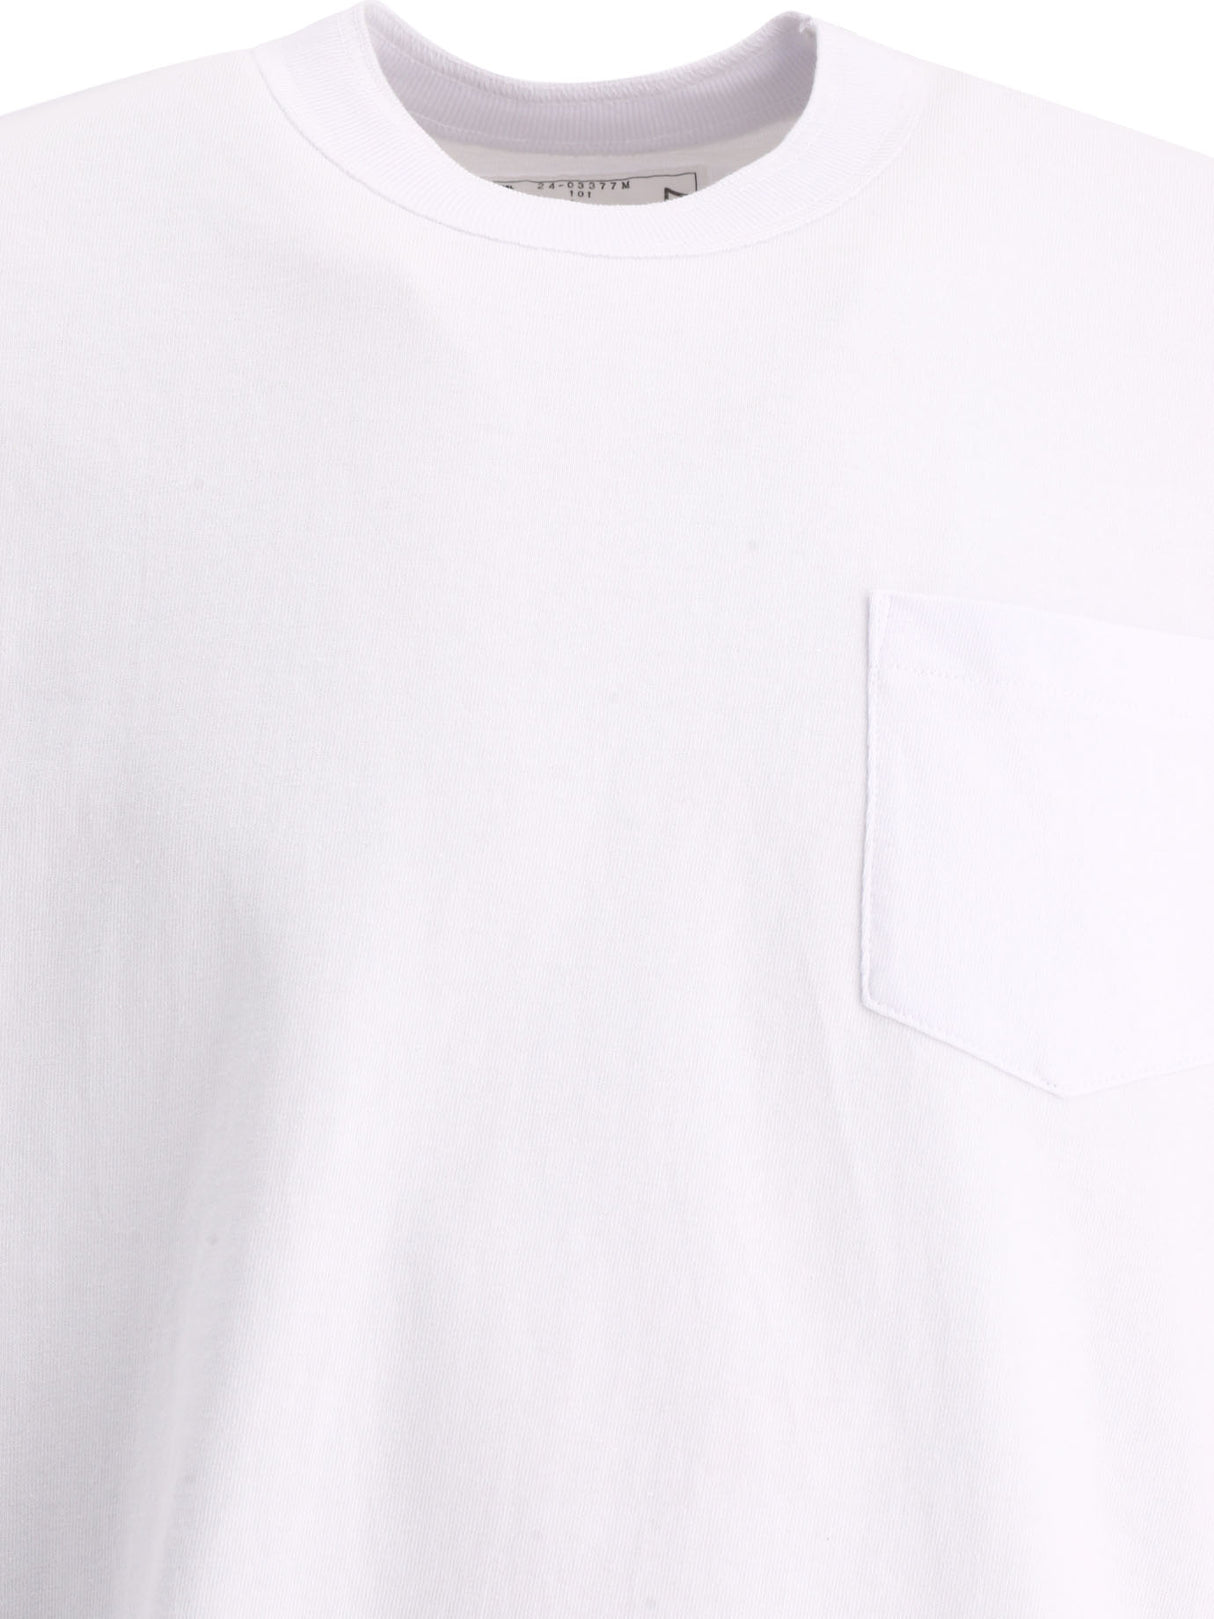 SACAI T-SHIRT WITH ZIPPERS DETAILS